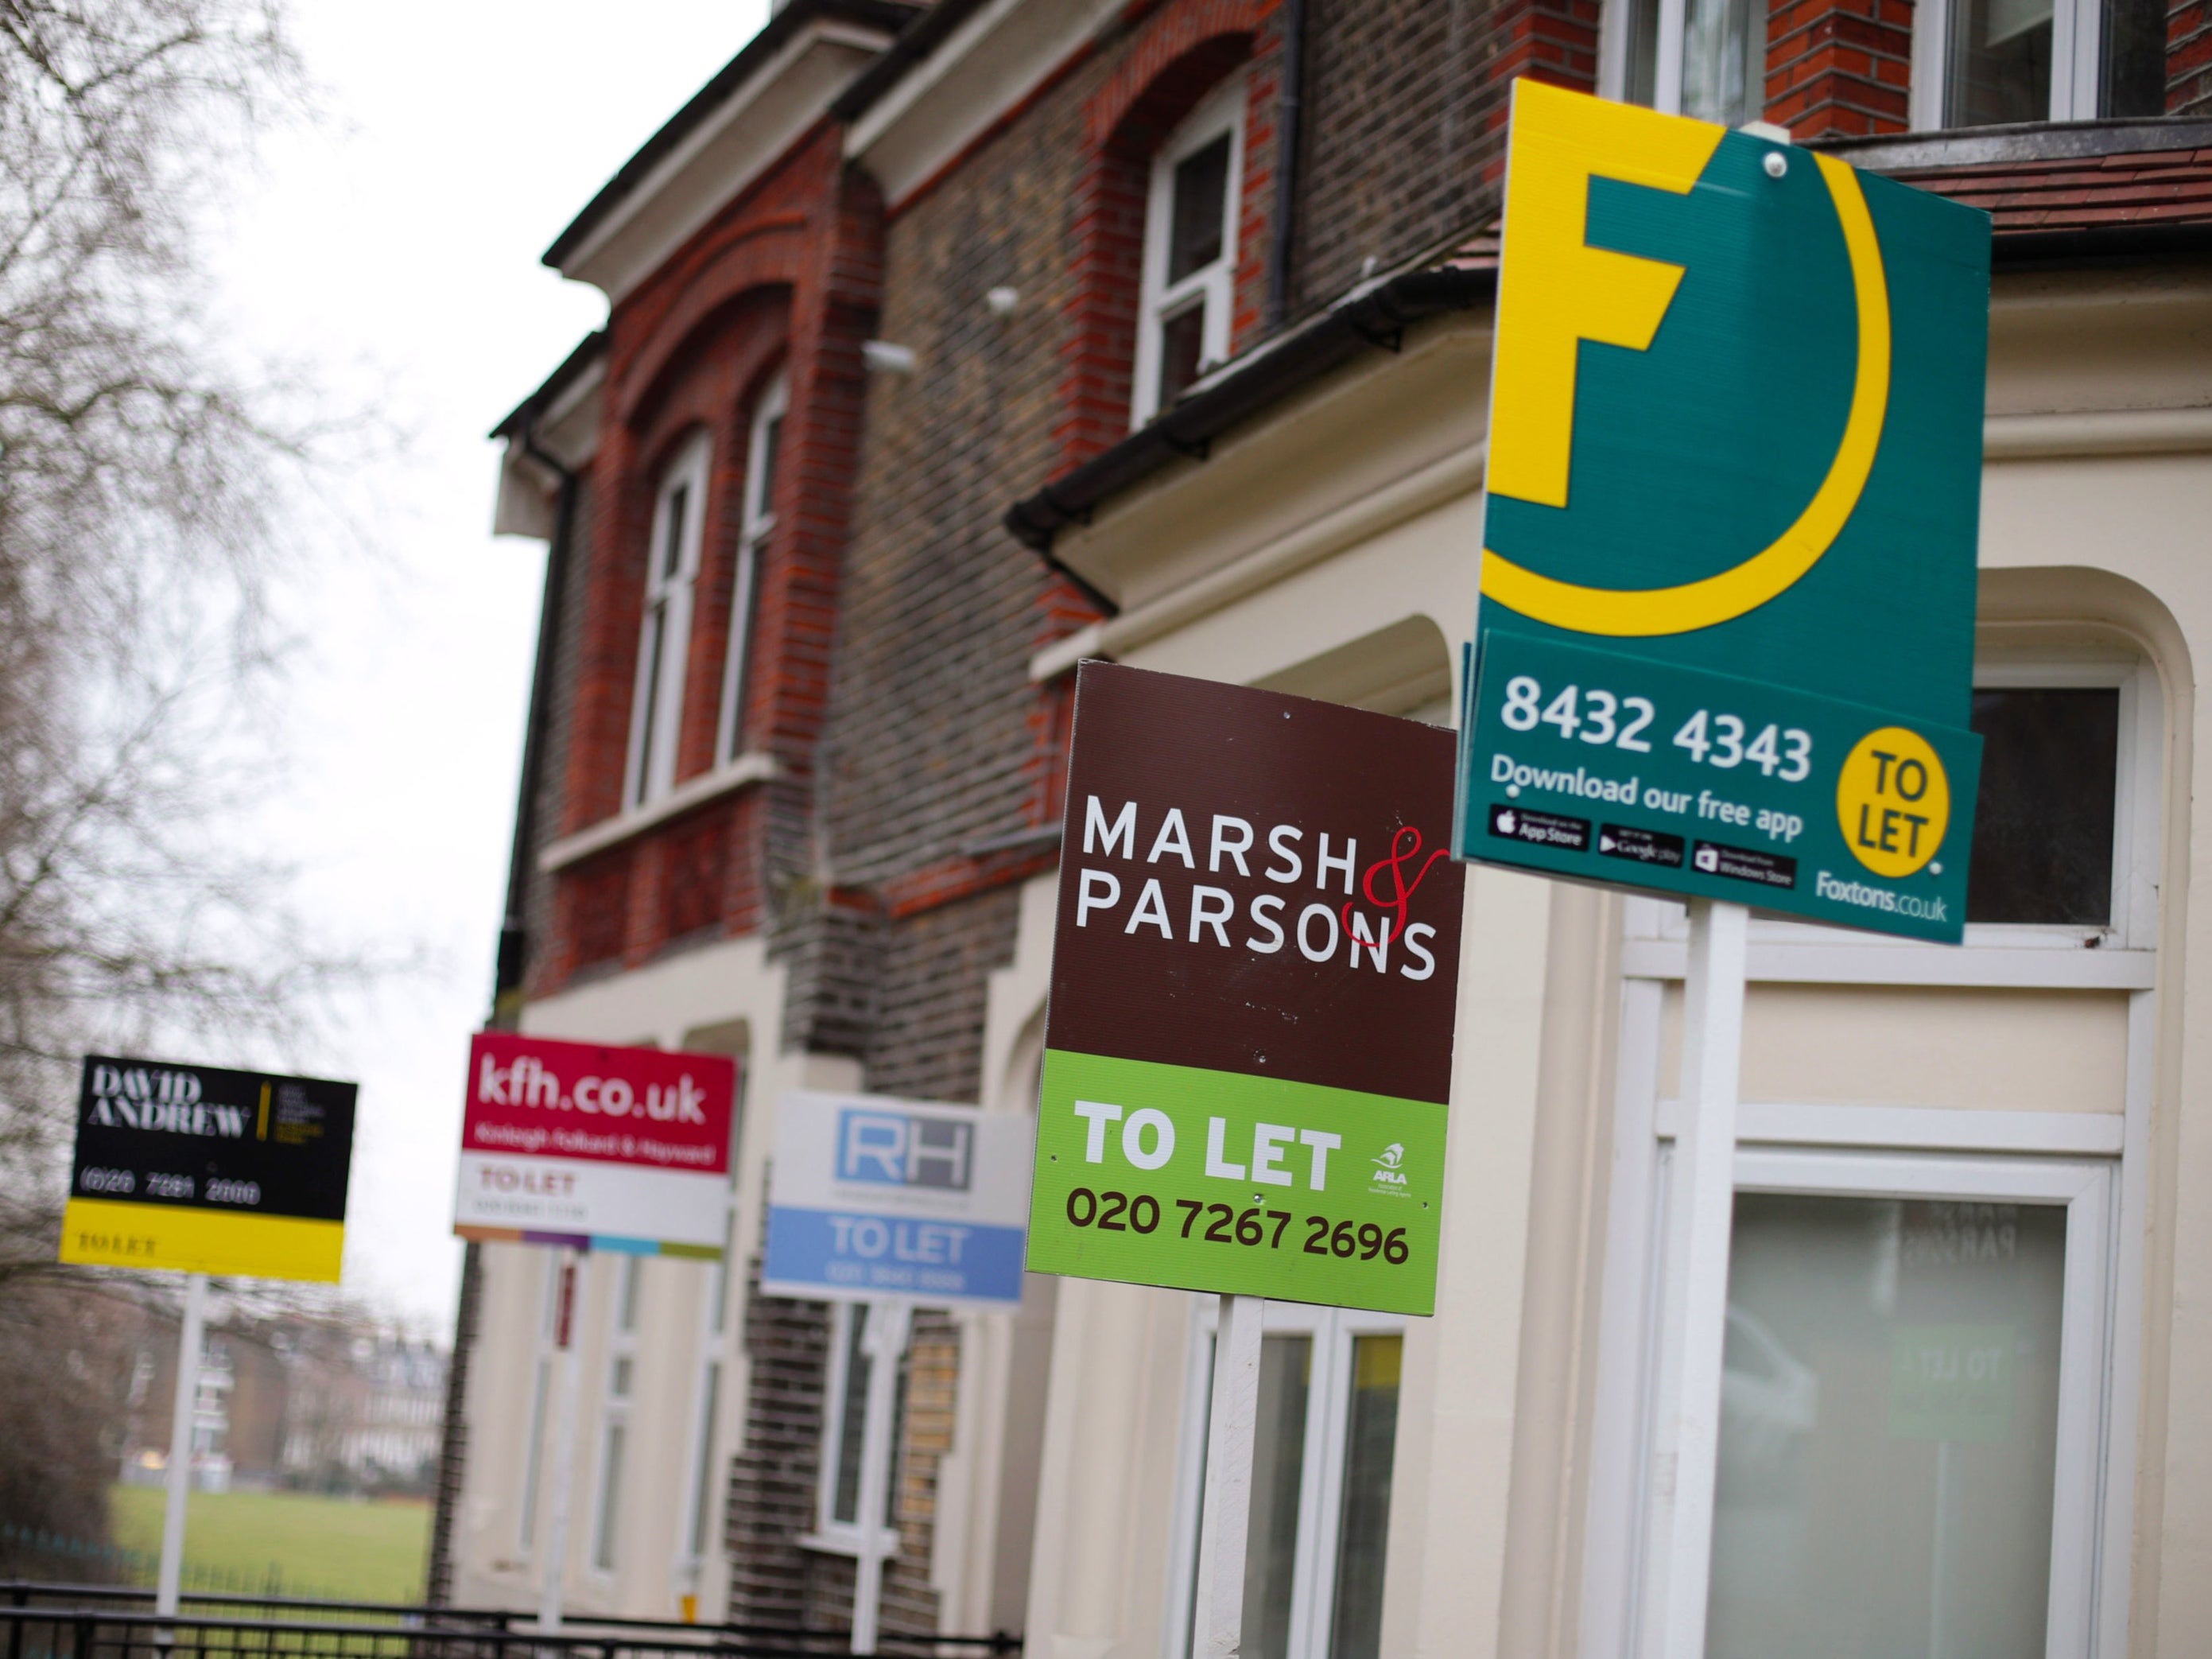 Tenants have faced rising rent costs